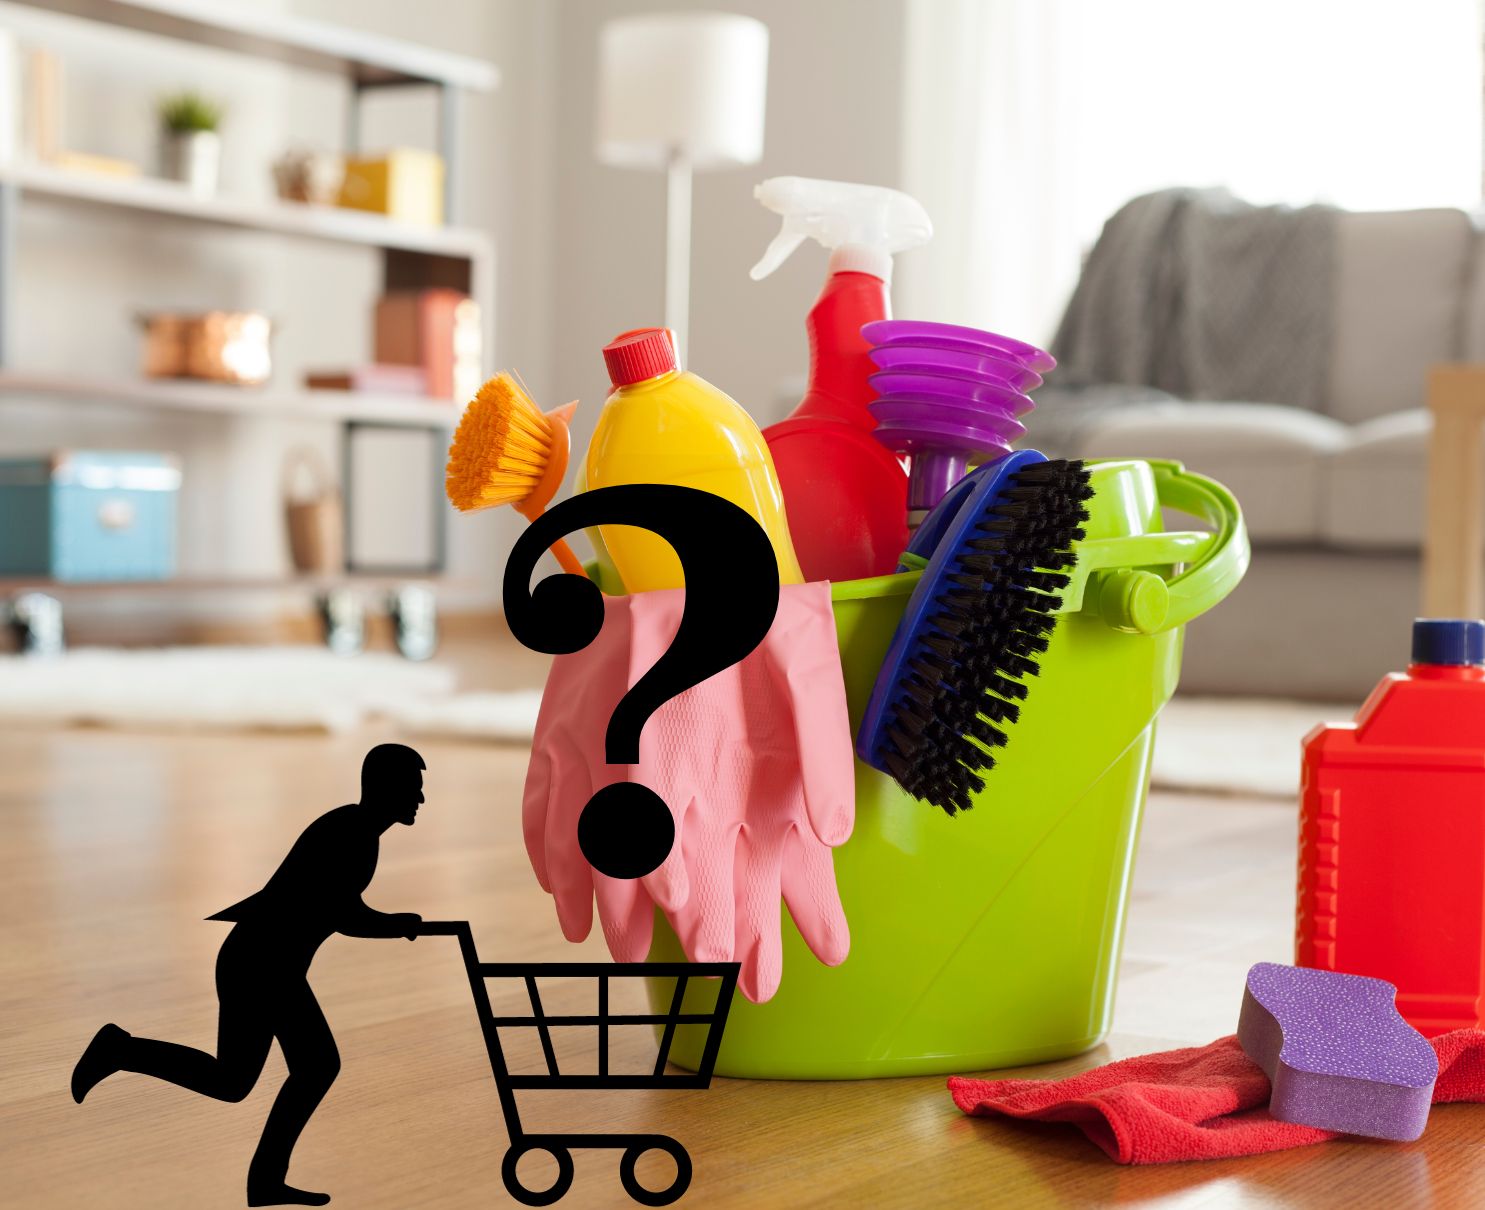 Where to Buy Commercial Cleaning Supplies Cheap